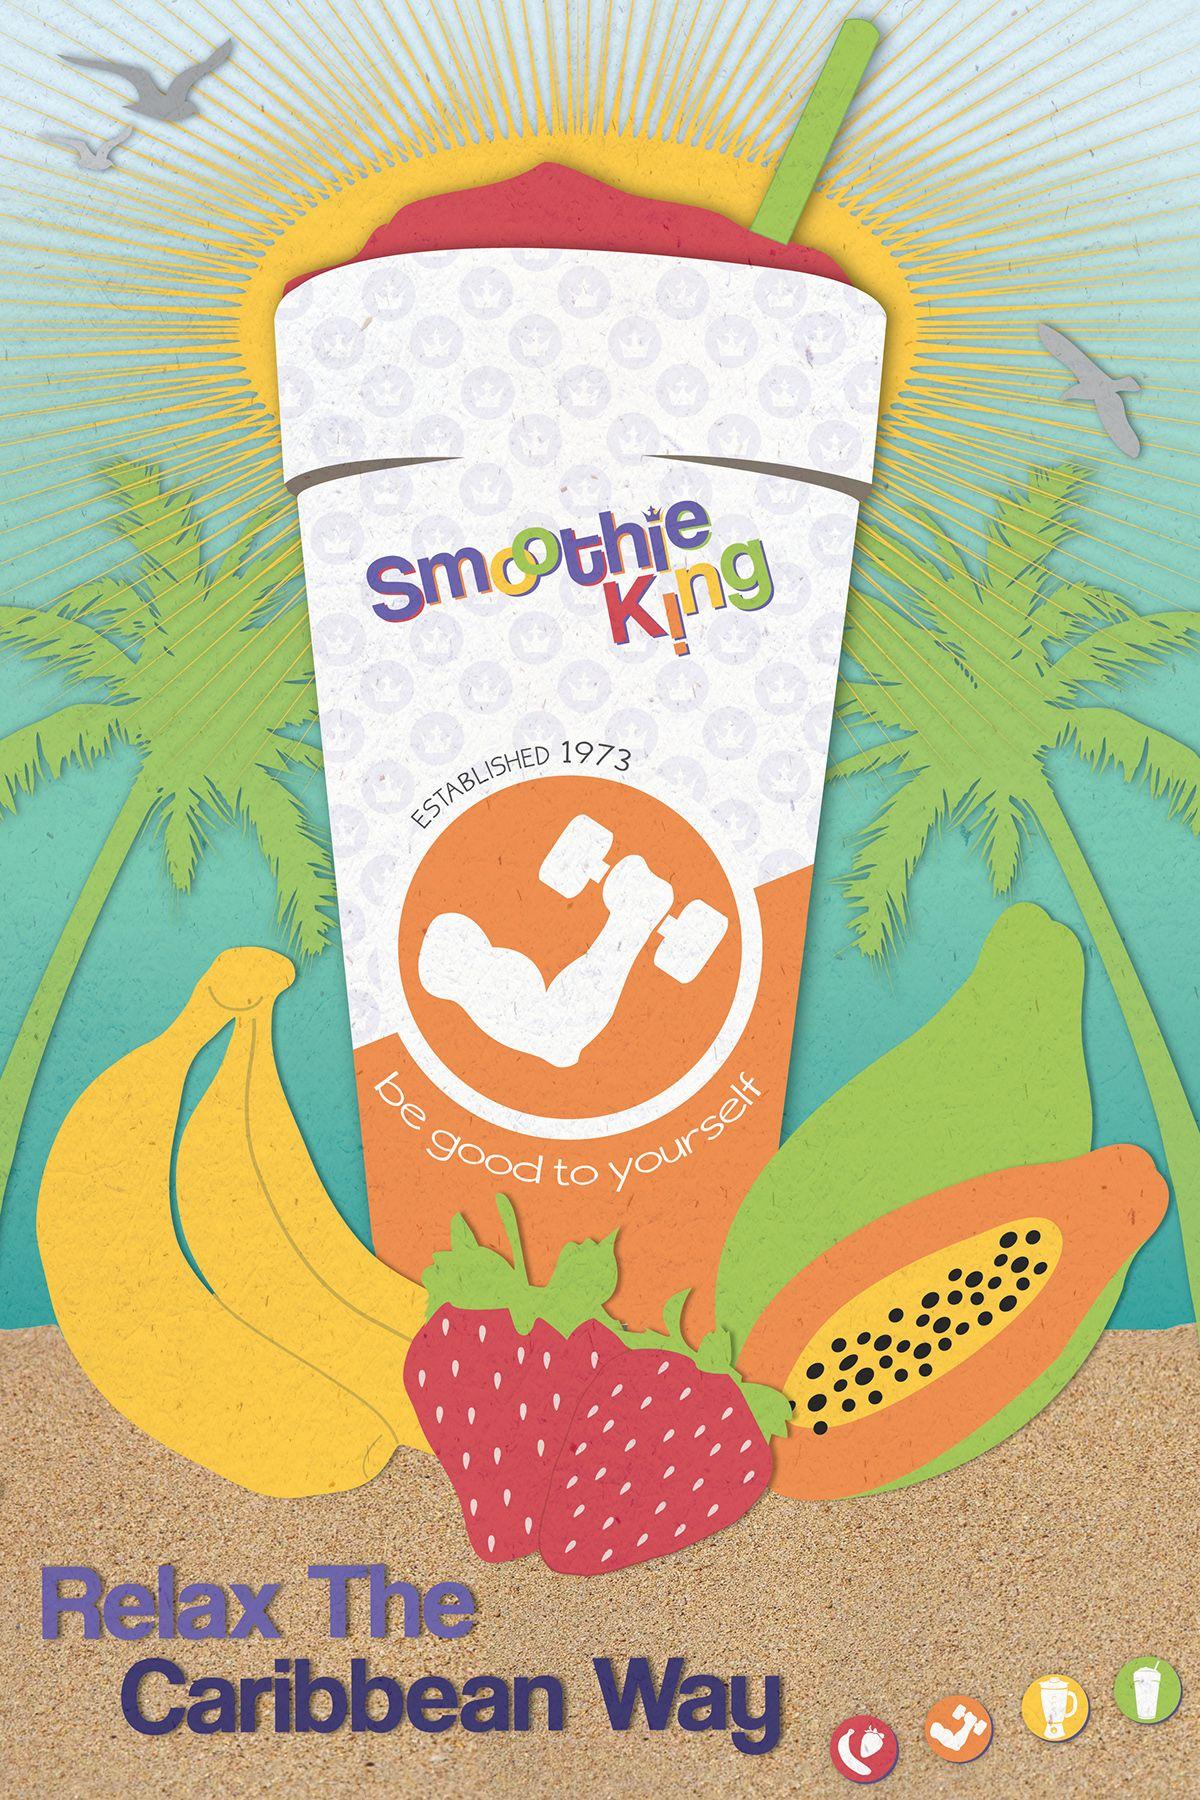 Smoothie King Logo - Redo of Smoothie King Logo and Promotional Poster on Behance